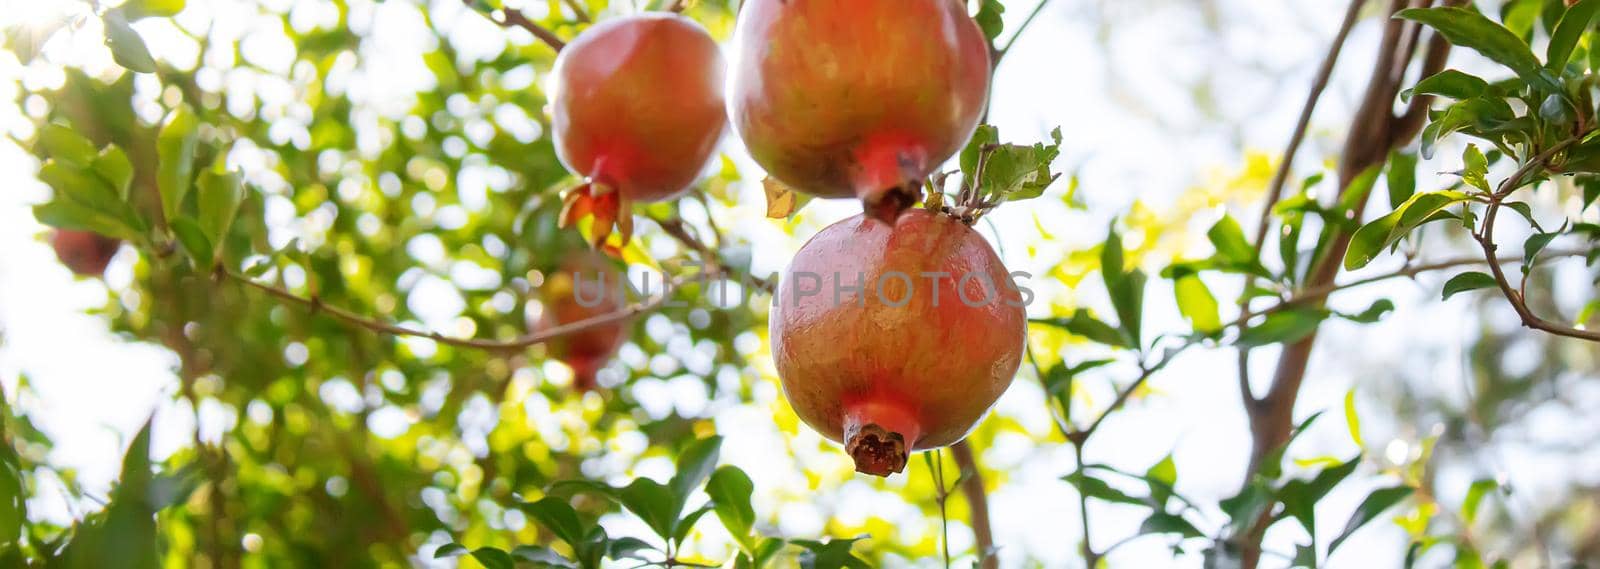 pomegranate on tree in a farm garden.selectiv focus by mila1784